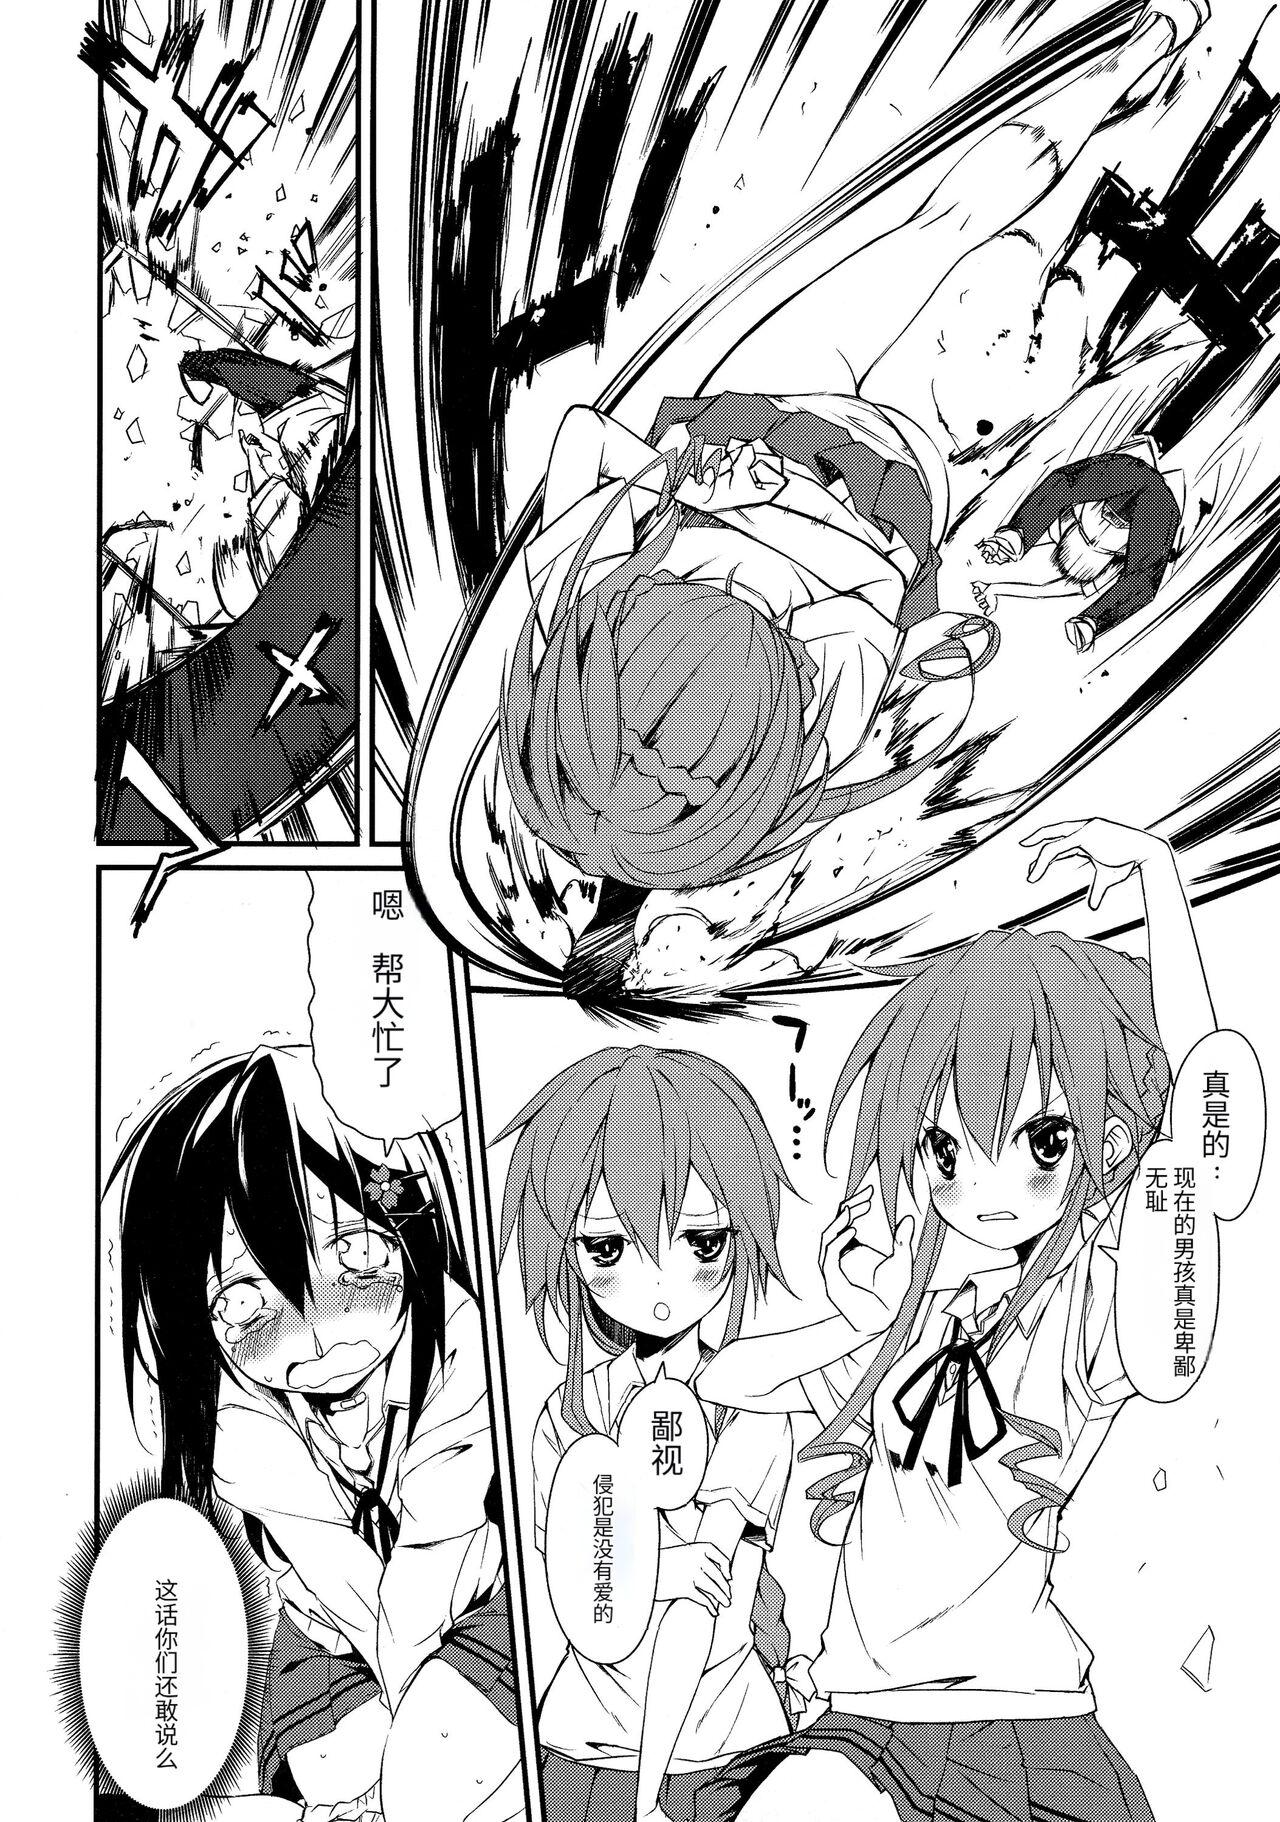 European Porn Shiori-chan, Yamaidon After School - Date a live Gay Kissing - Page 6